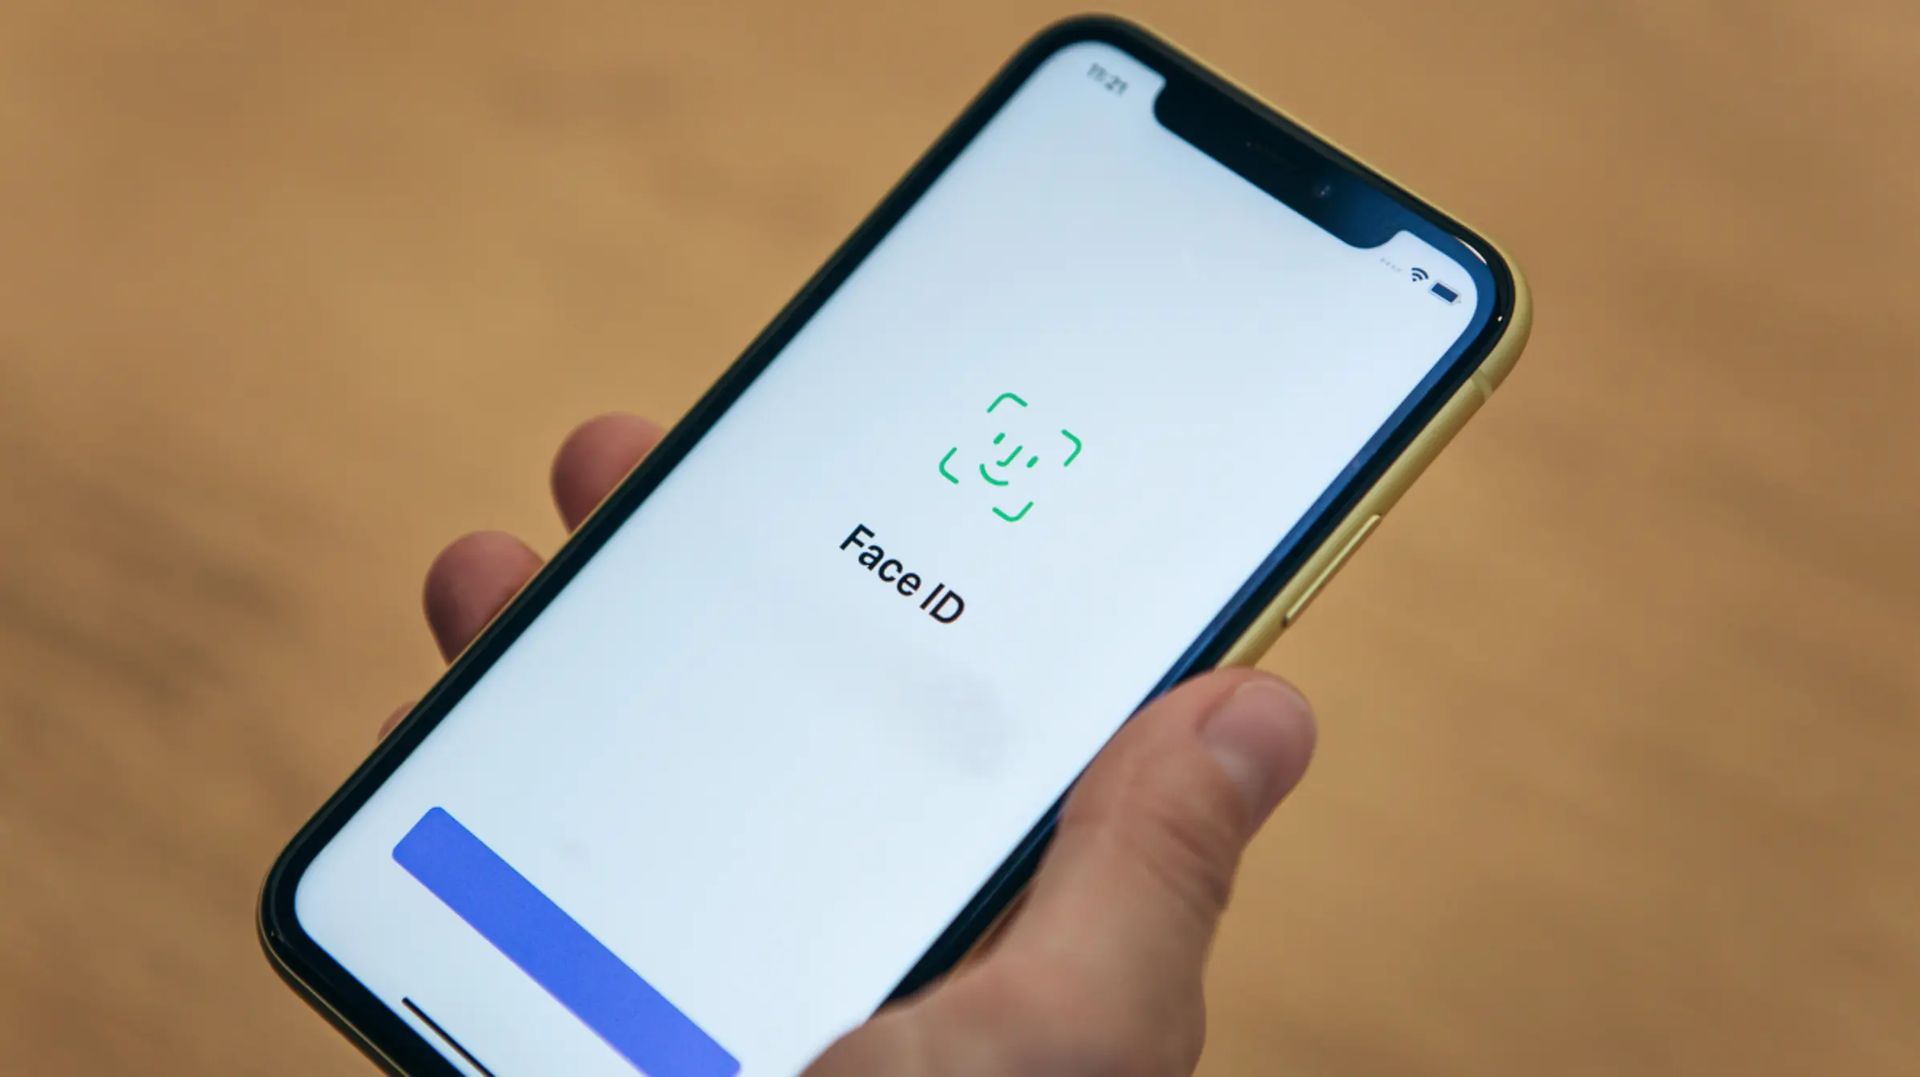 In this article, we are going to be going over how to add another Face ID to your iPhone, so you can add another person's face to unlock your phone.